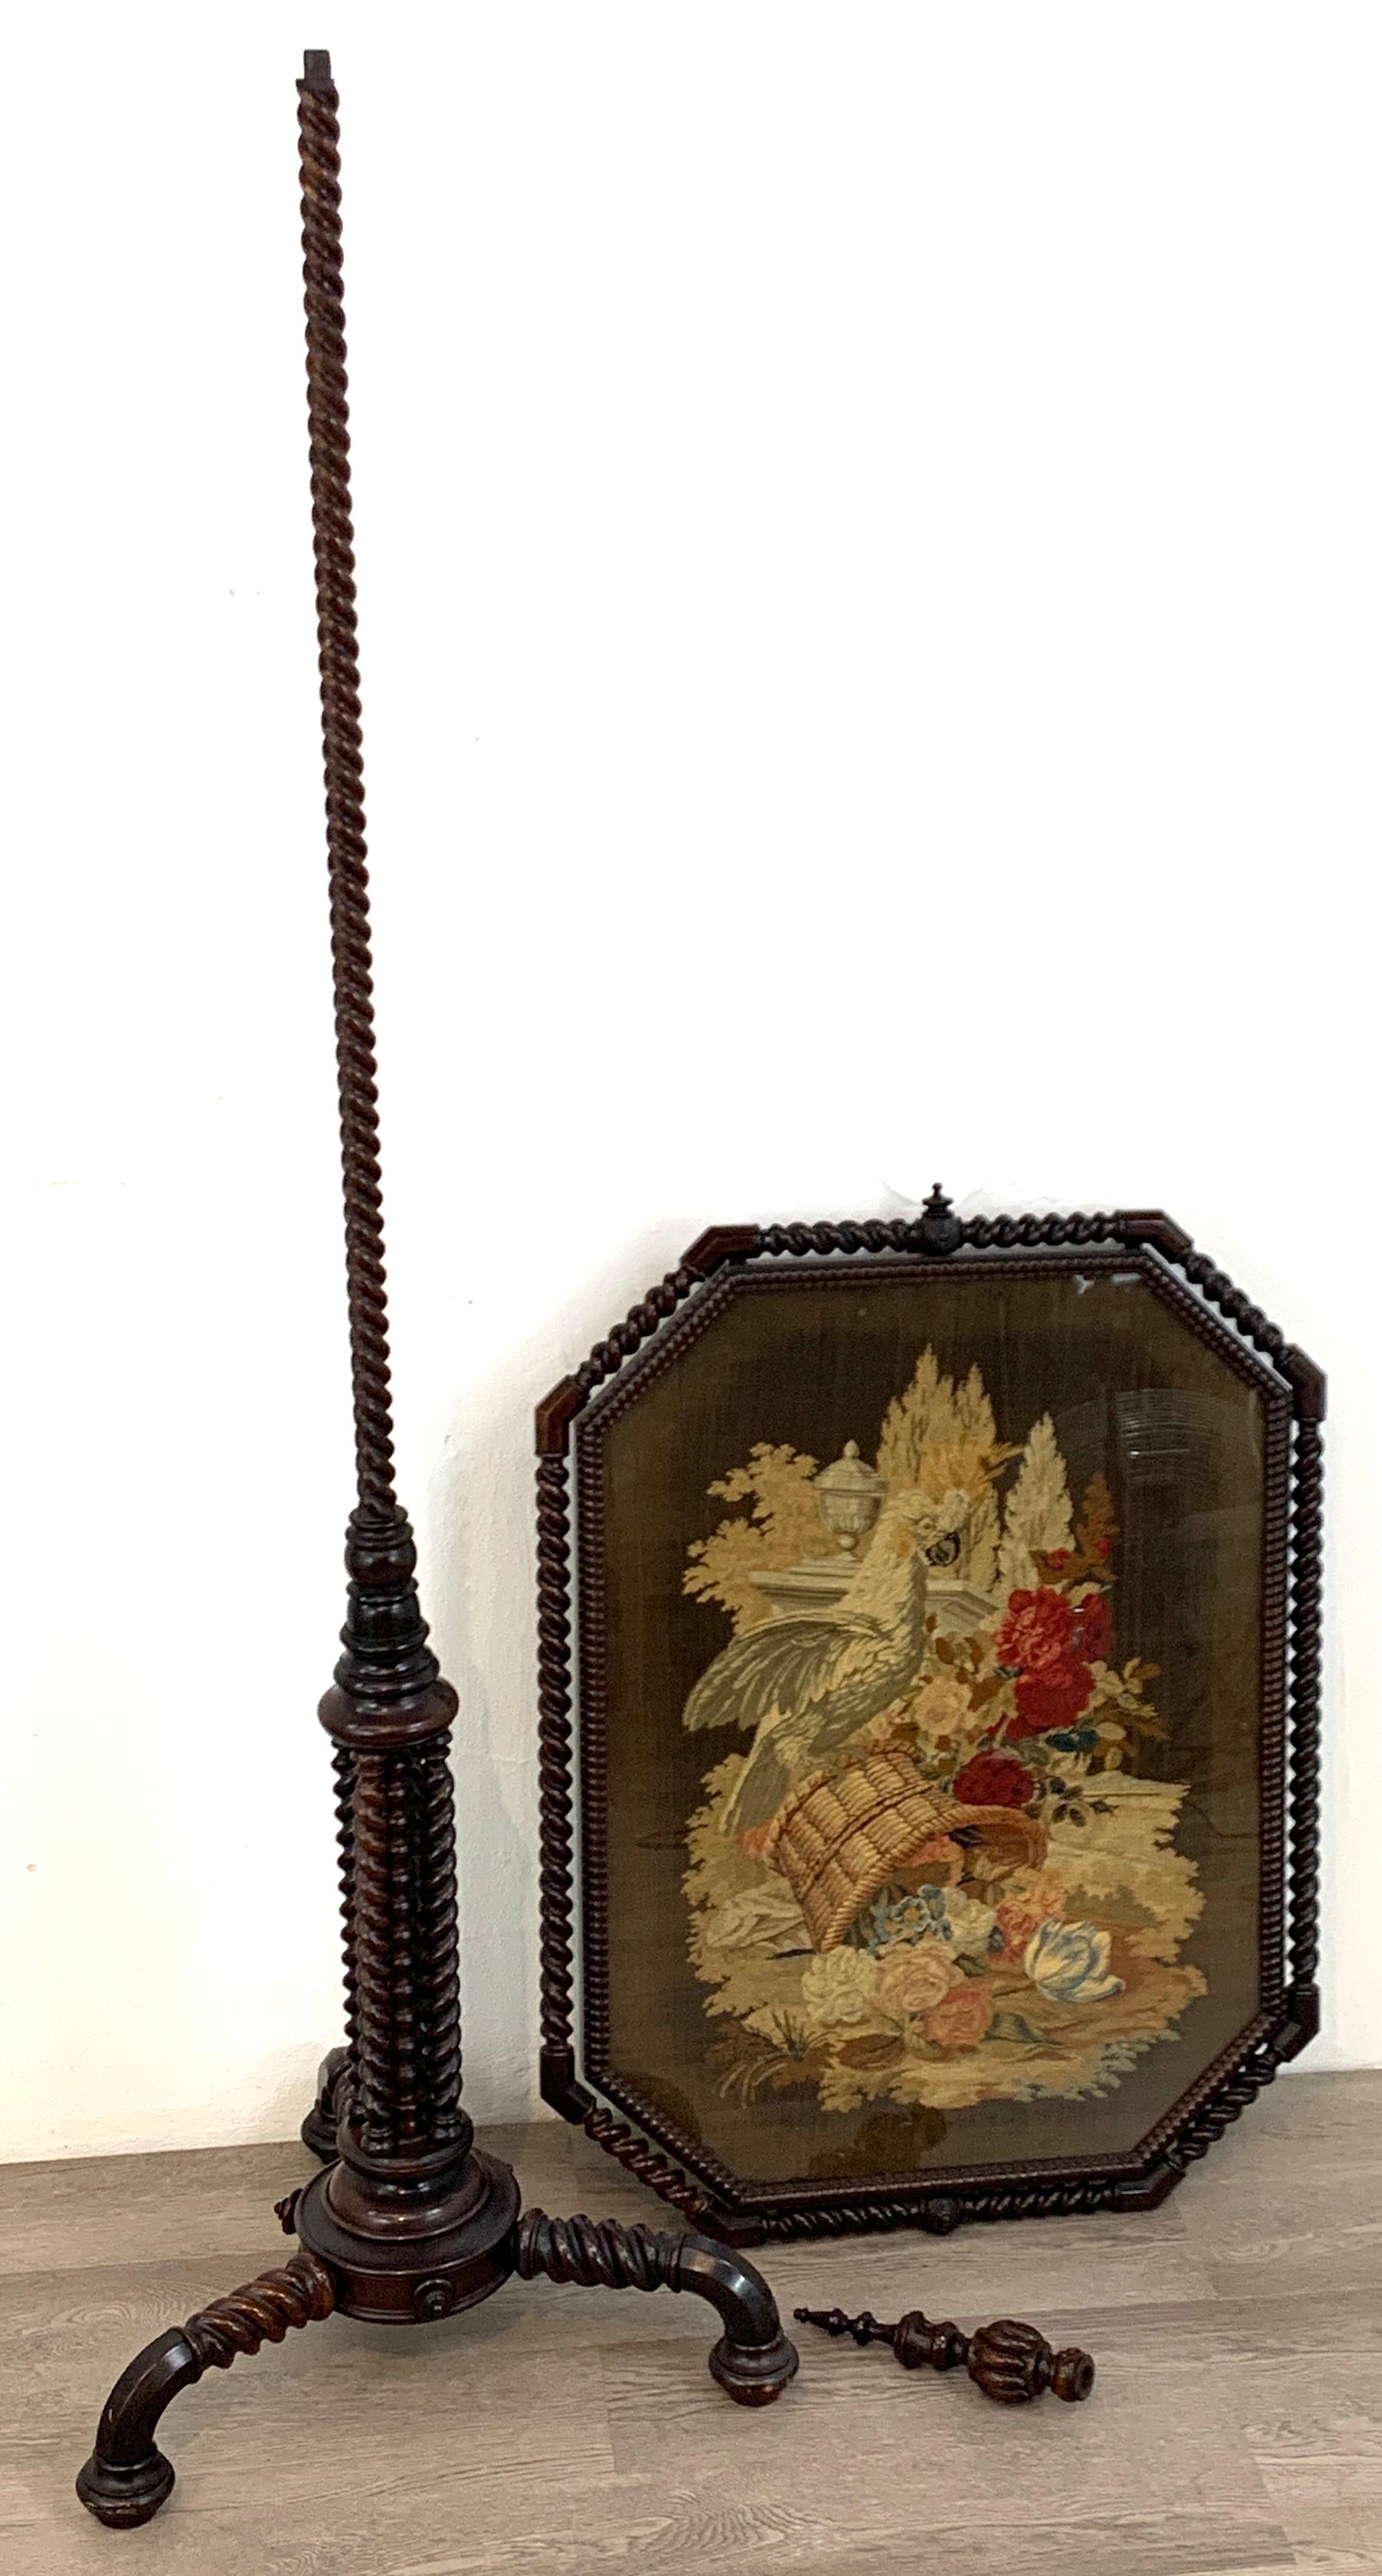 Exquisite 19th Century Rosewood & Needlepoint Cockatoo in Landscape Firescreen For Sale 4